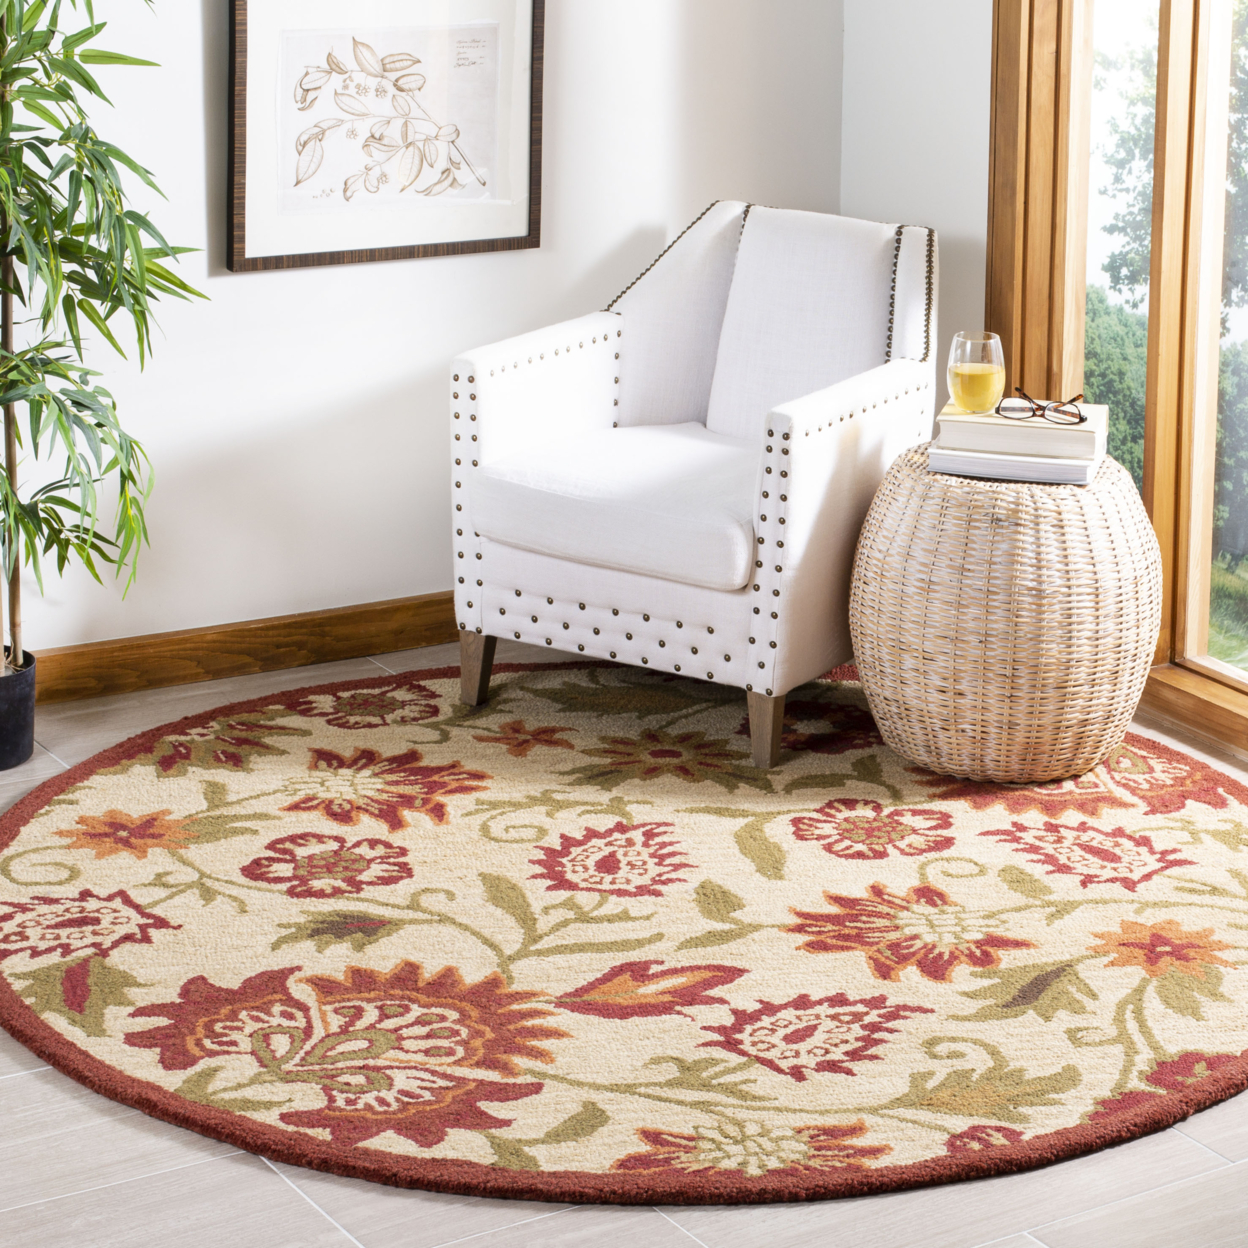 SAFAVIEH Blossom BLM862A Hand-hooked Beige / Multi Rug - 2' 3 X 14'